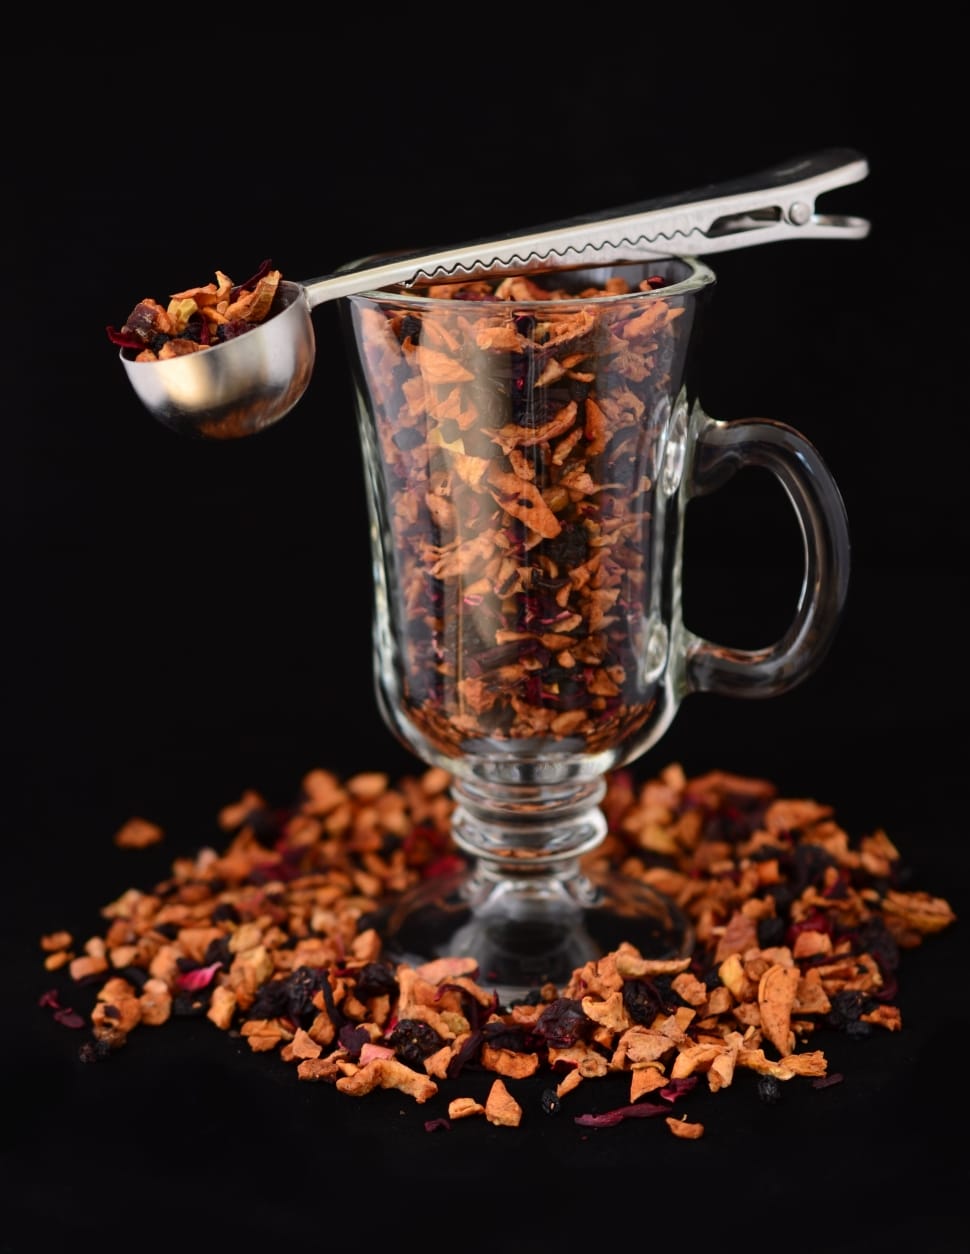 stainless steel scooper and clear glass mug filled with dried fruits preview